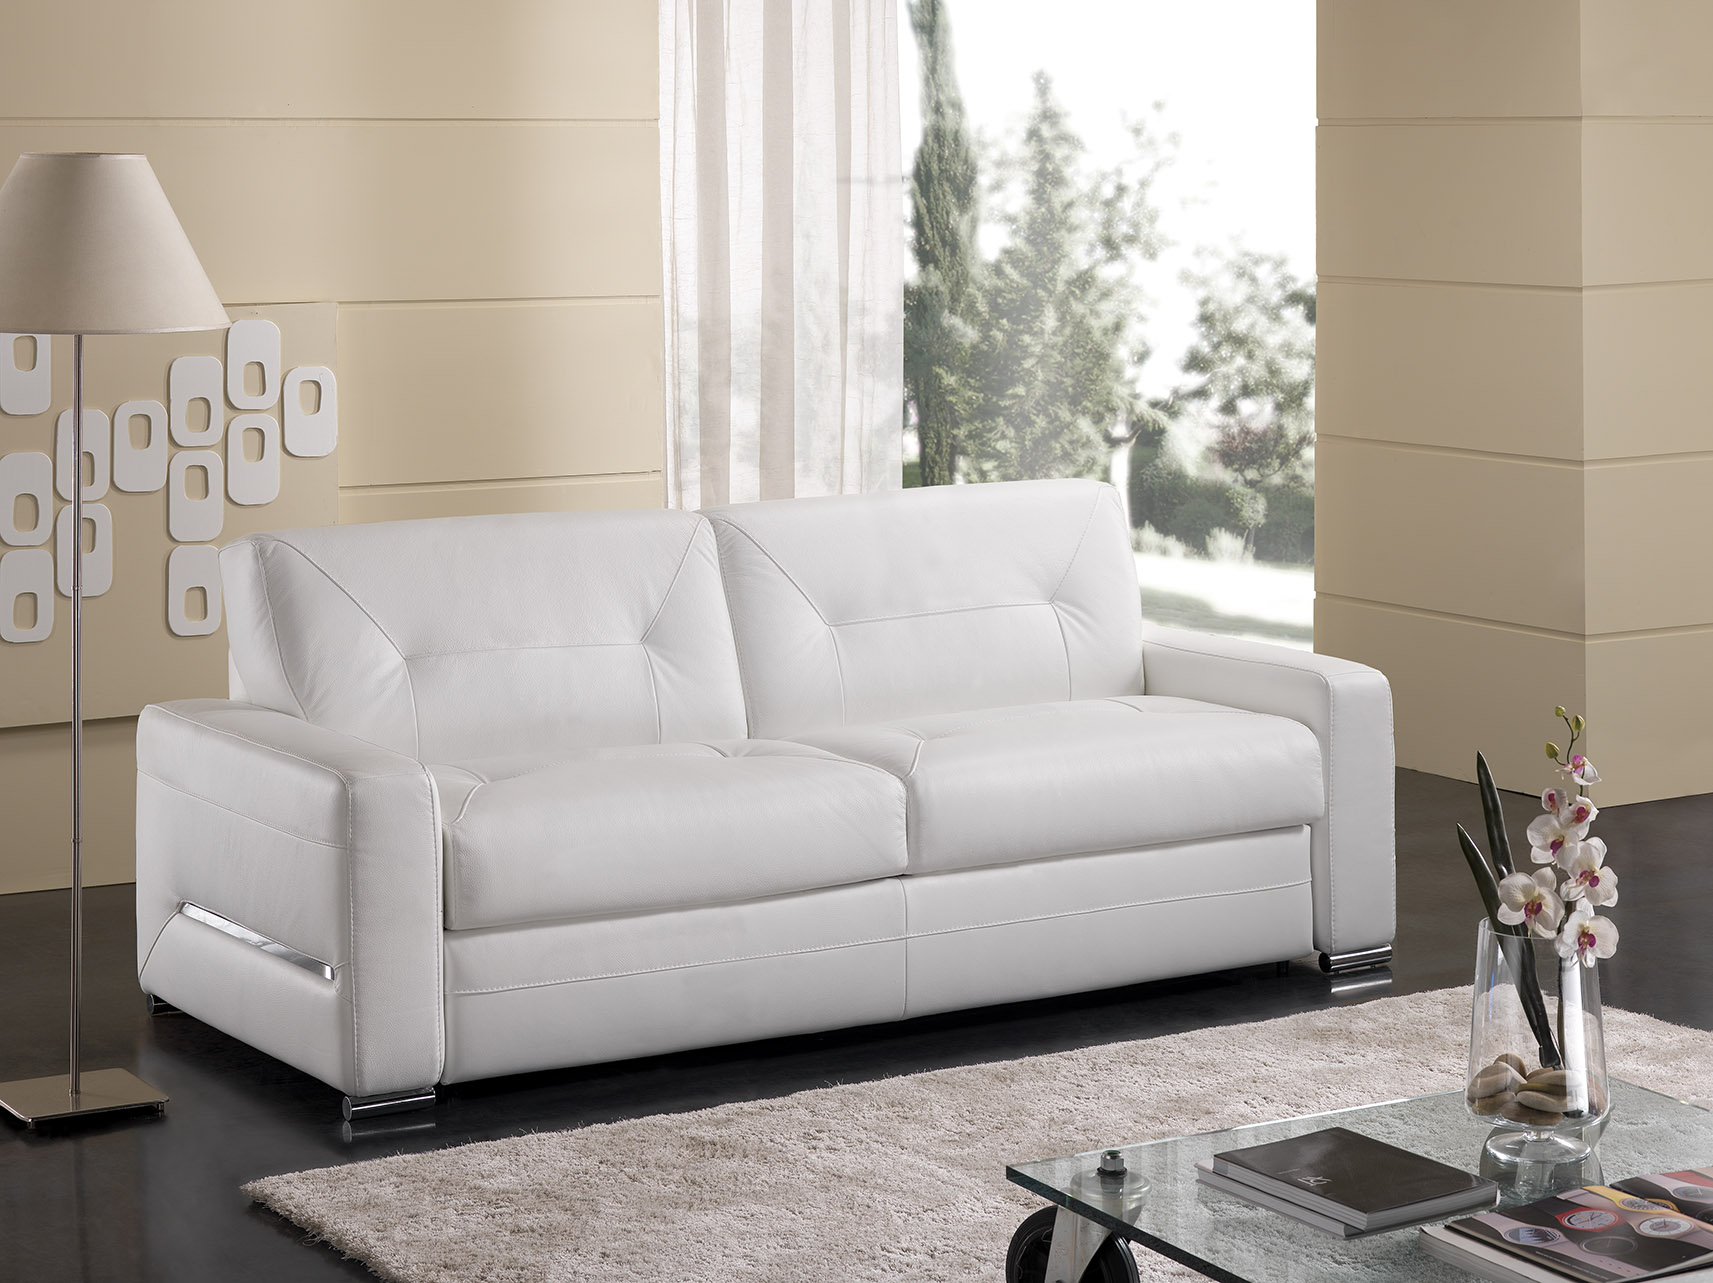 Living Room Furniture Reclining and Sliding Seats Sets Clio Sofa Bed